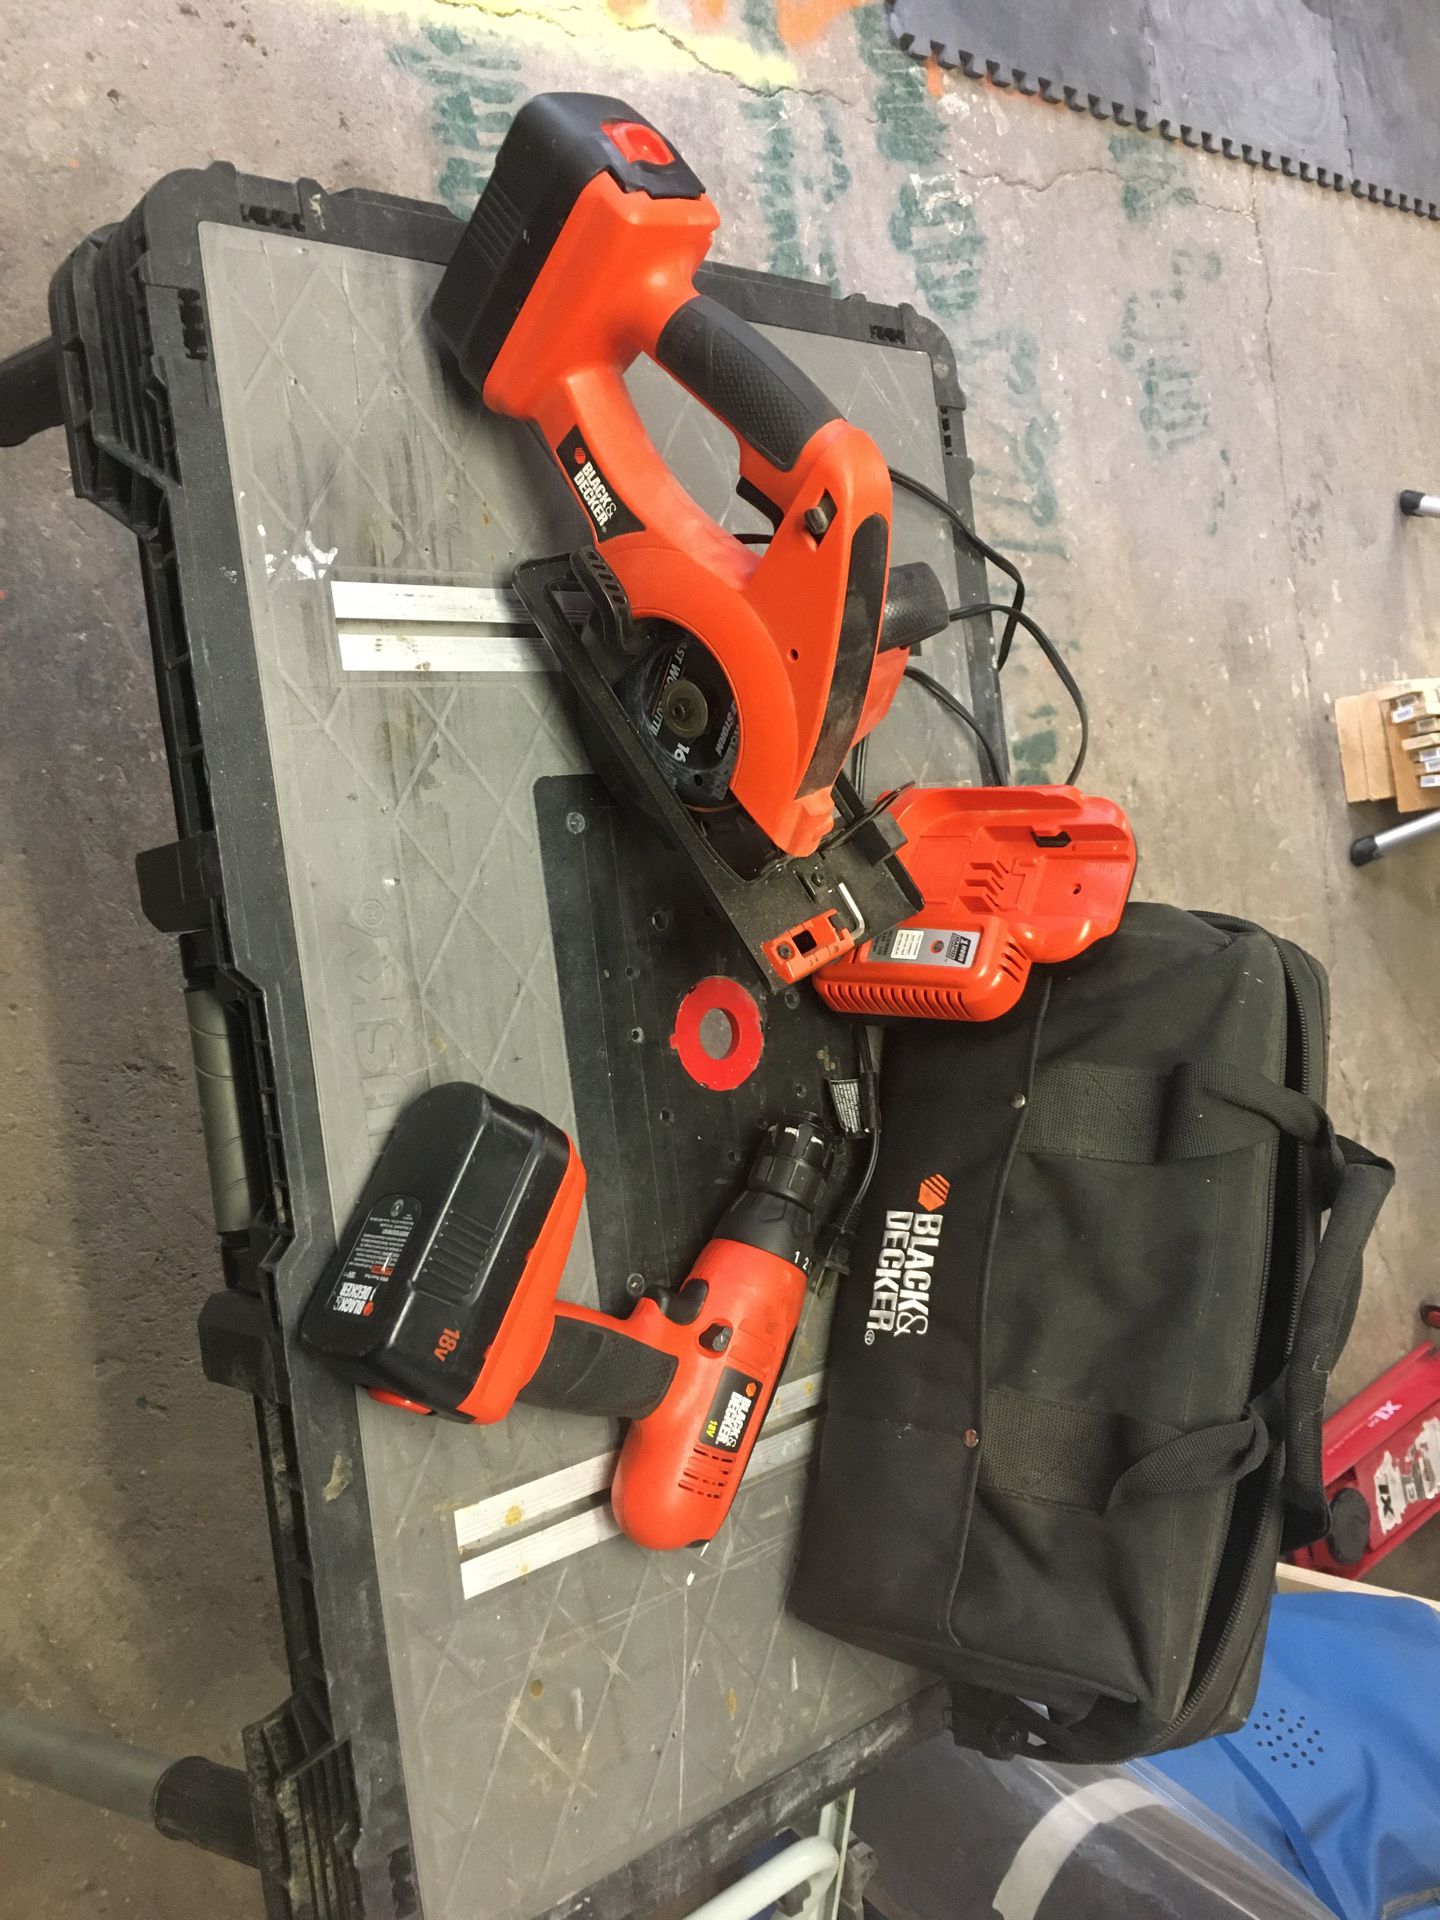 Cordless drill and saw